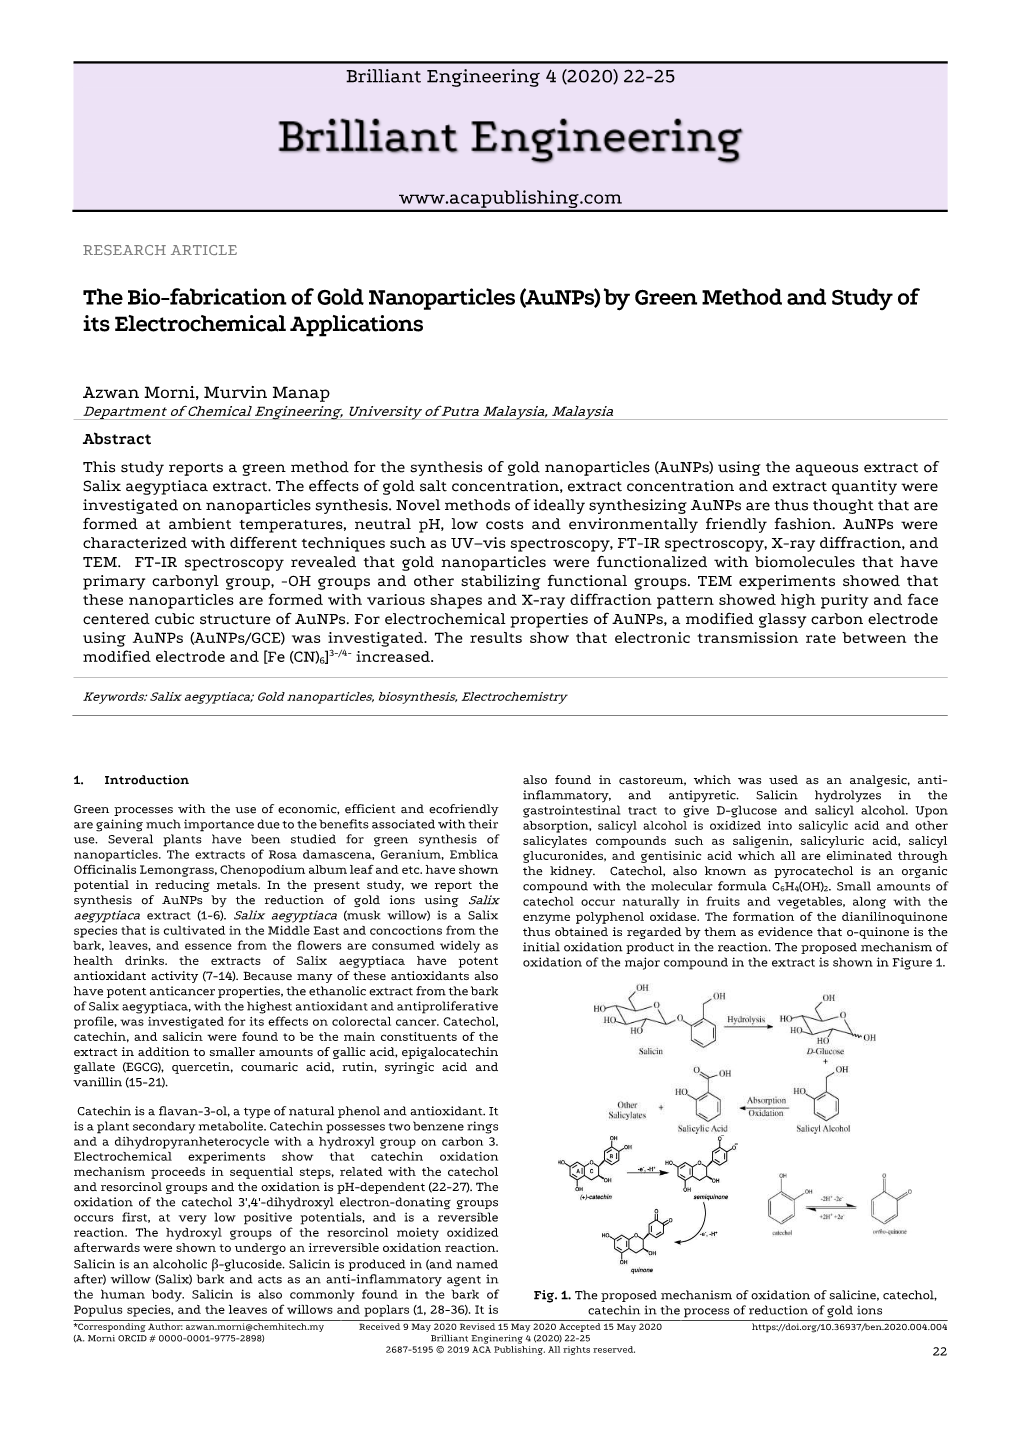 The Bio-Fabrication of Gold Nanoparticles (Aunps) by Green Method and Study of Its Electrochemical Applications